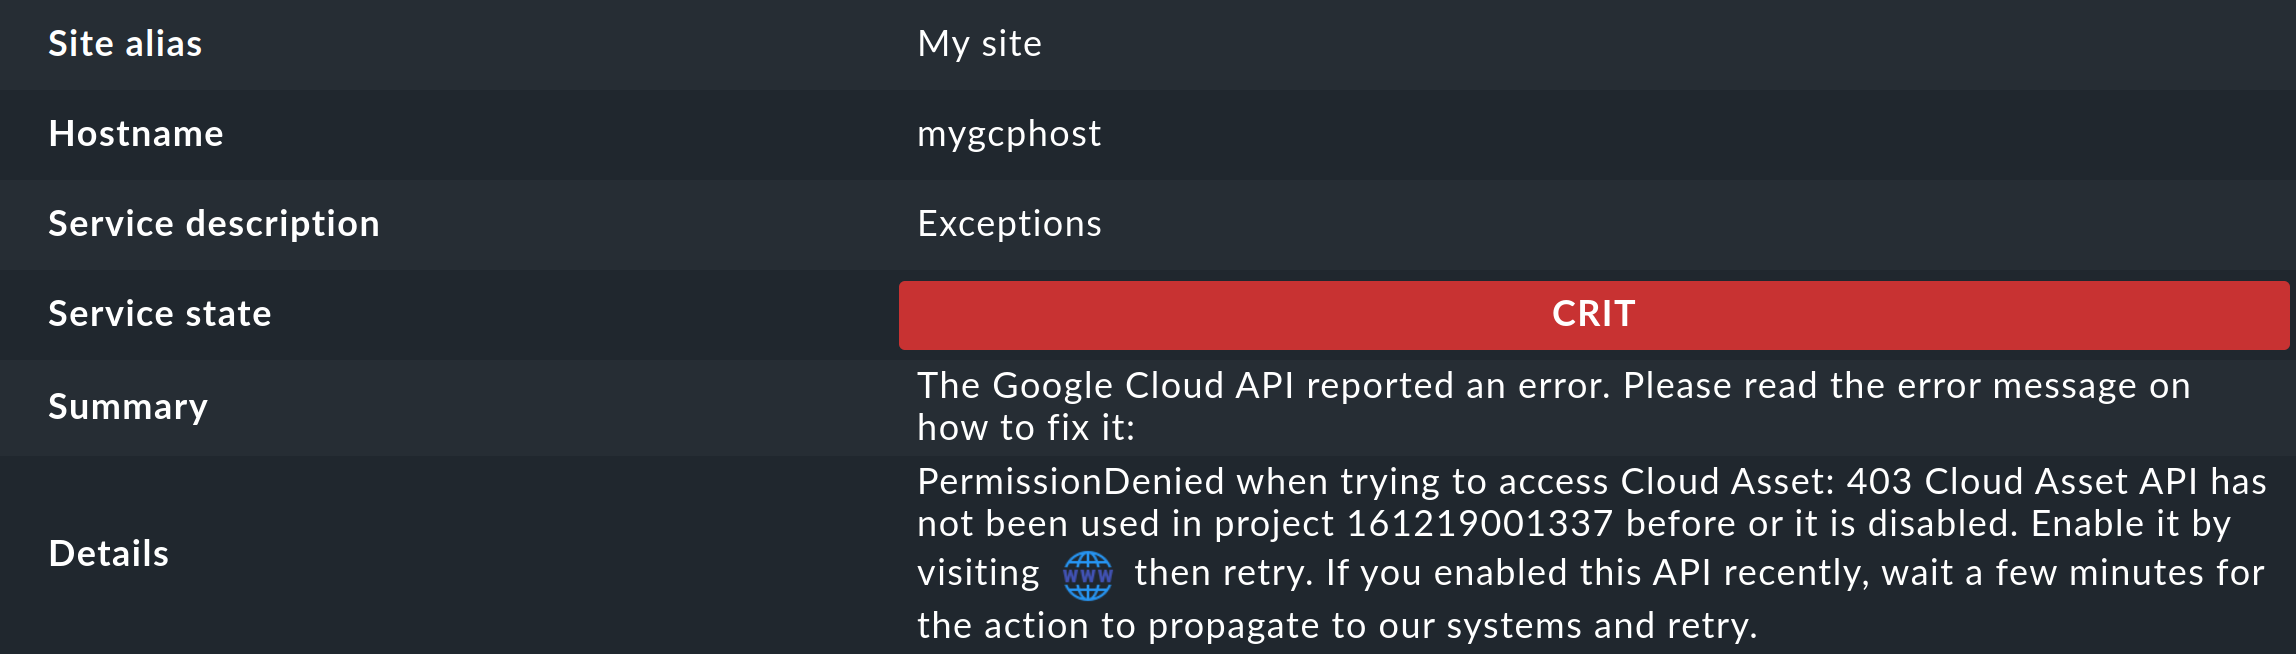 monitoring gcp exceptions details